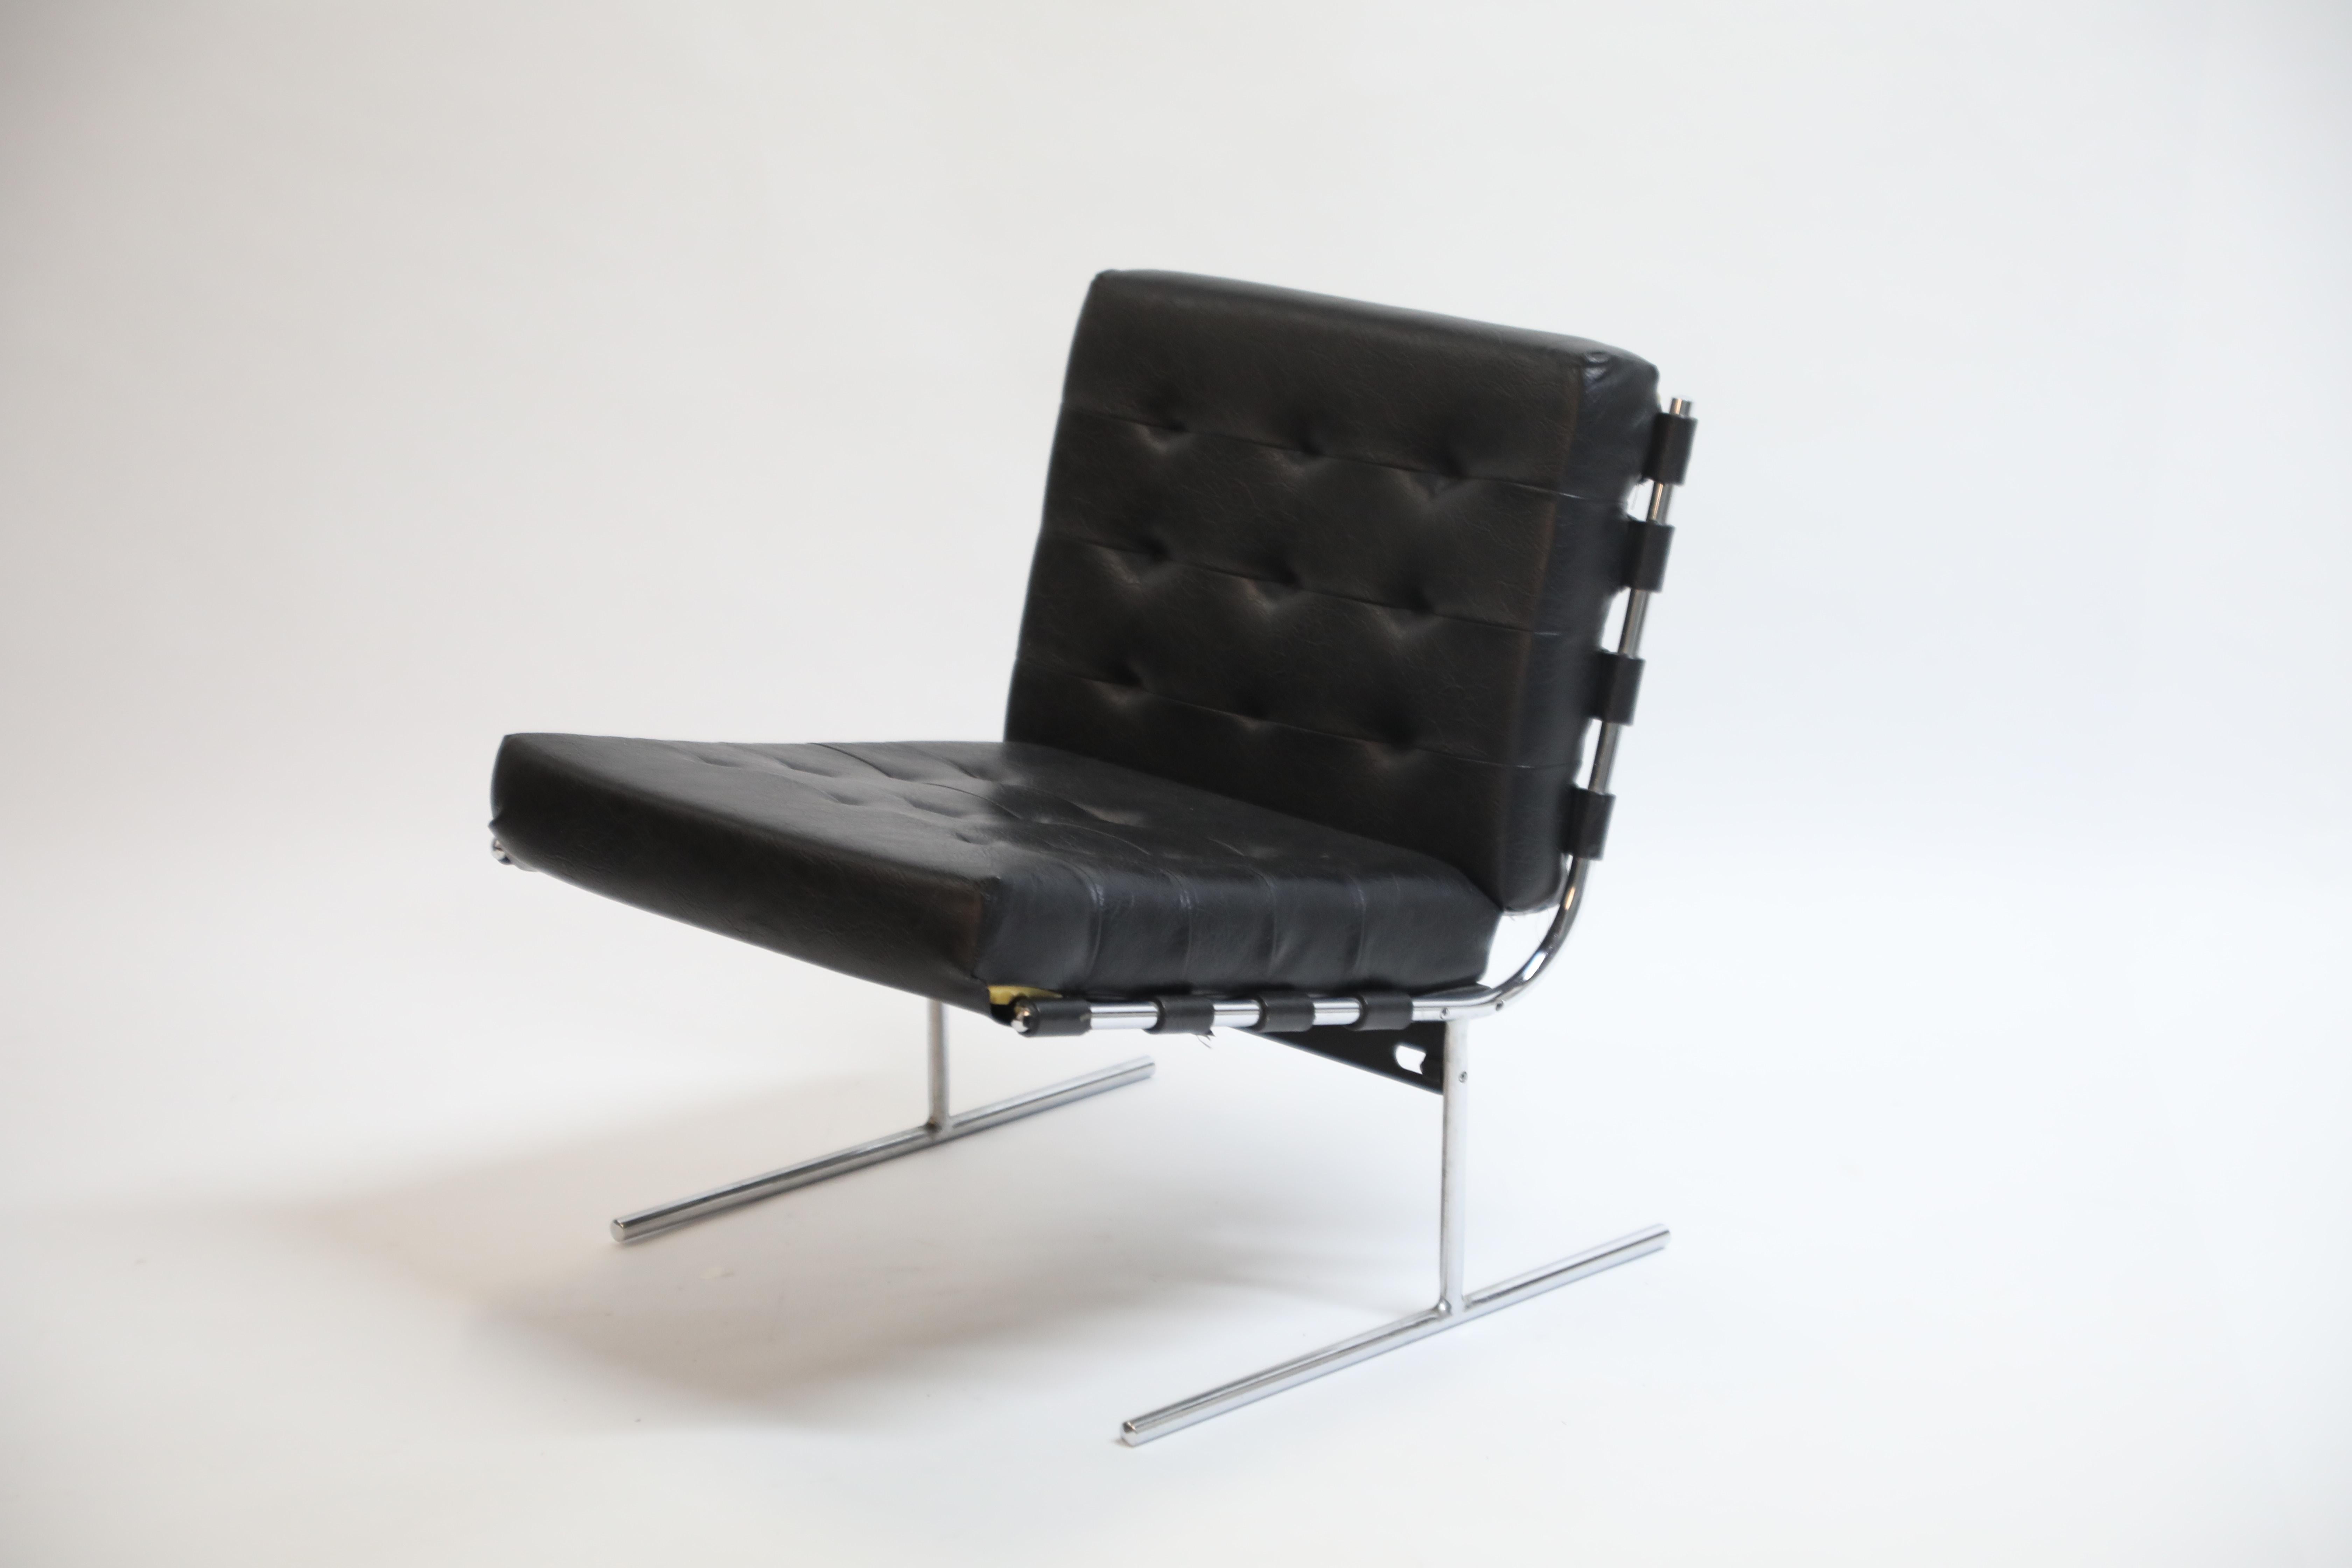 Newly imported from Rio de Janeiro, Brazil, this rarely available pair of T-chairs by Jorge Zalszupin and manufactured by L'Atalier encapsulates the quality and innovation of his designs. Comprised of a sleek chrome frame that has a similar base as